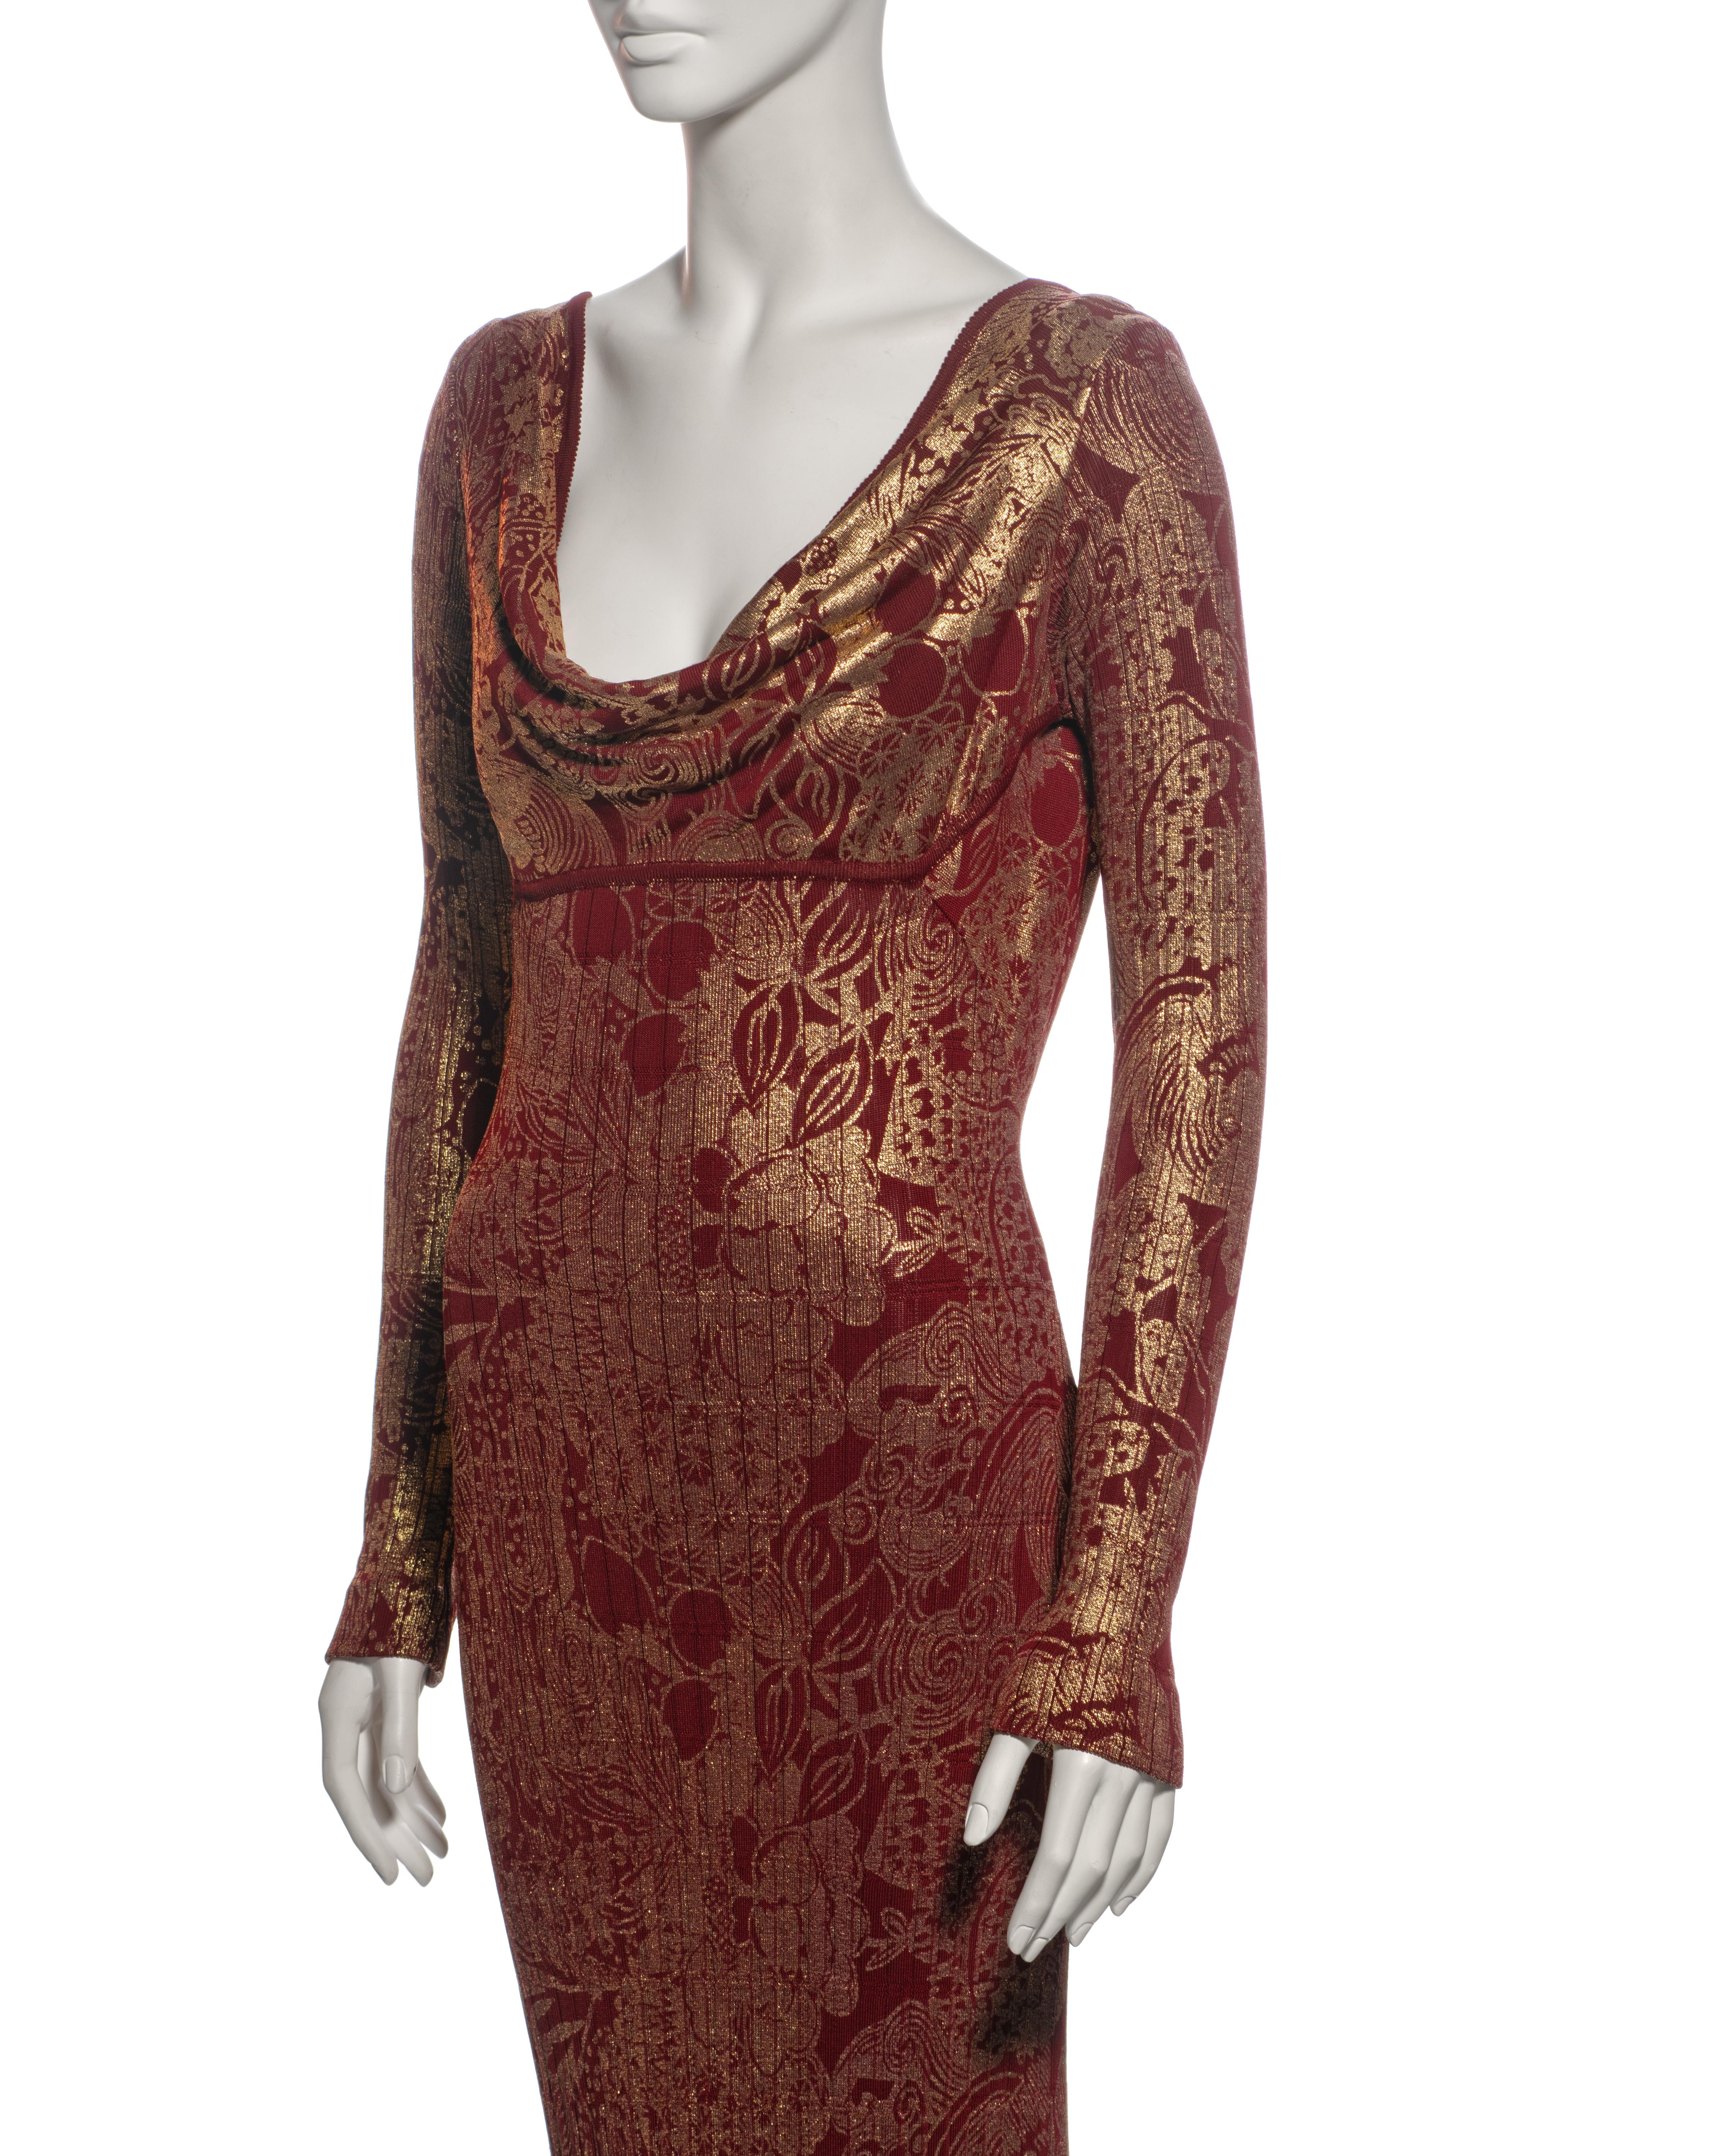 John Galliano Bordeaux Knit Evening Dress with Gold Foil Floral Print, fw 1998 For Sale 7